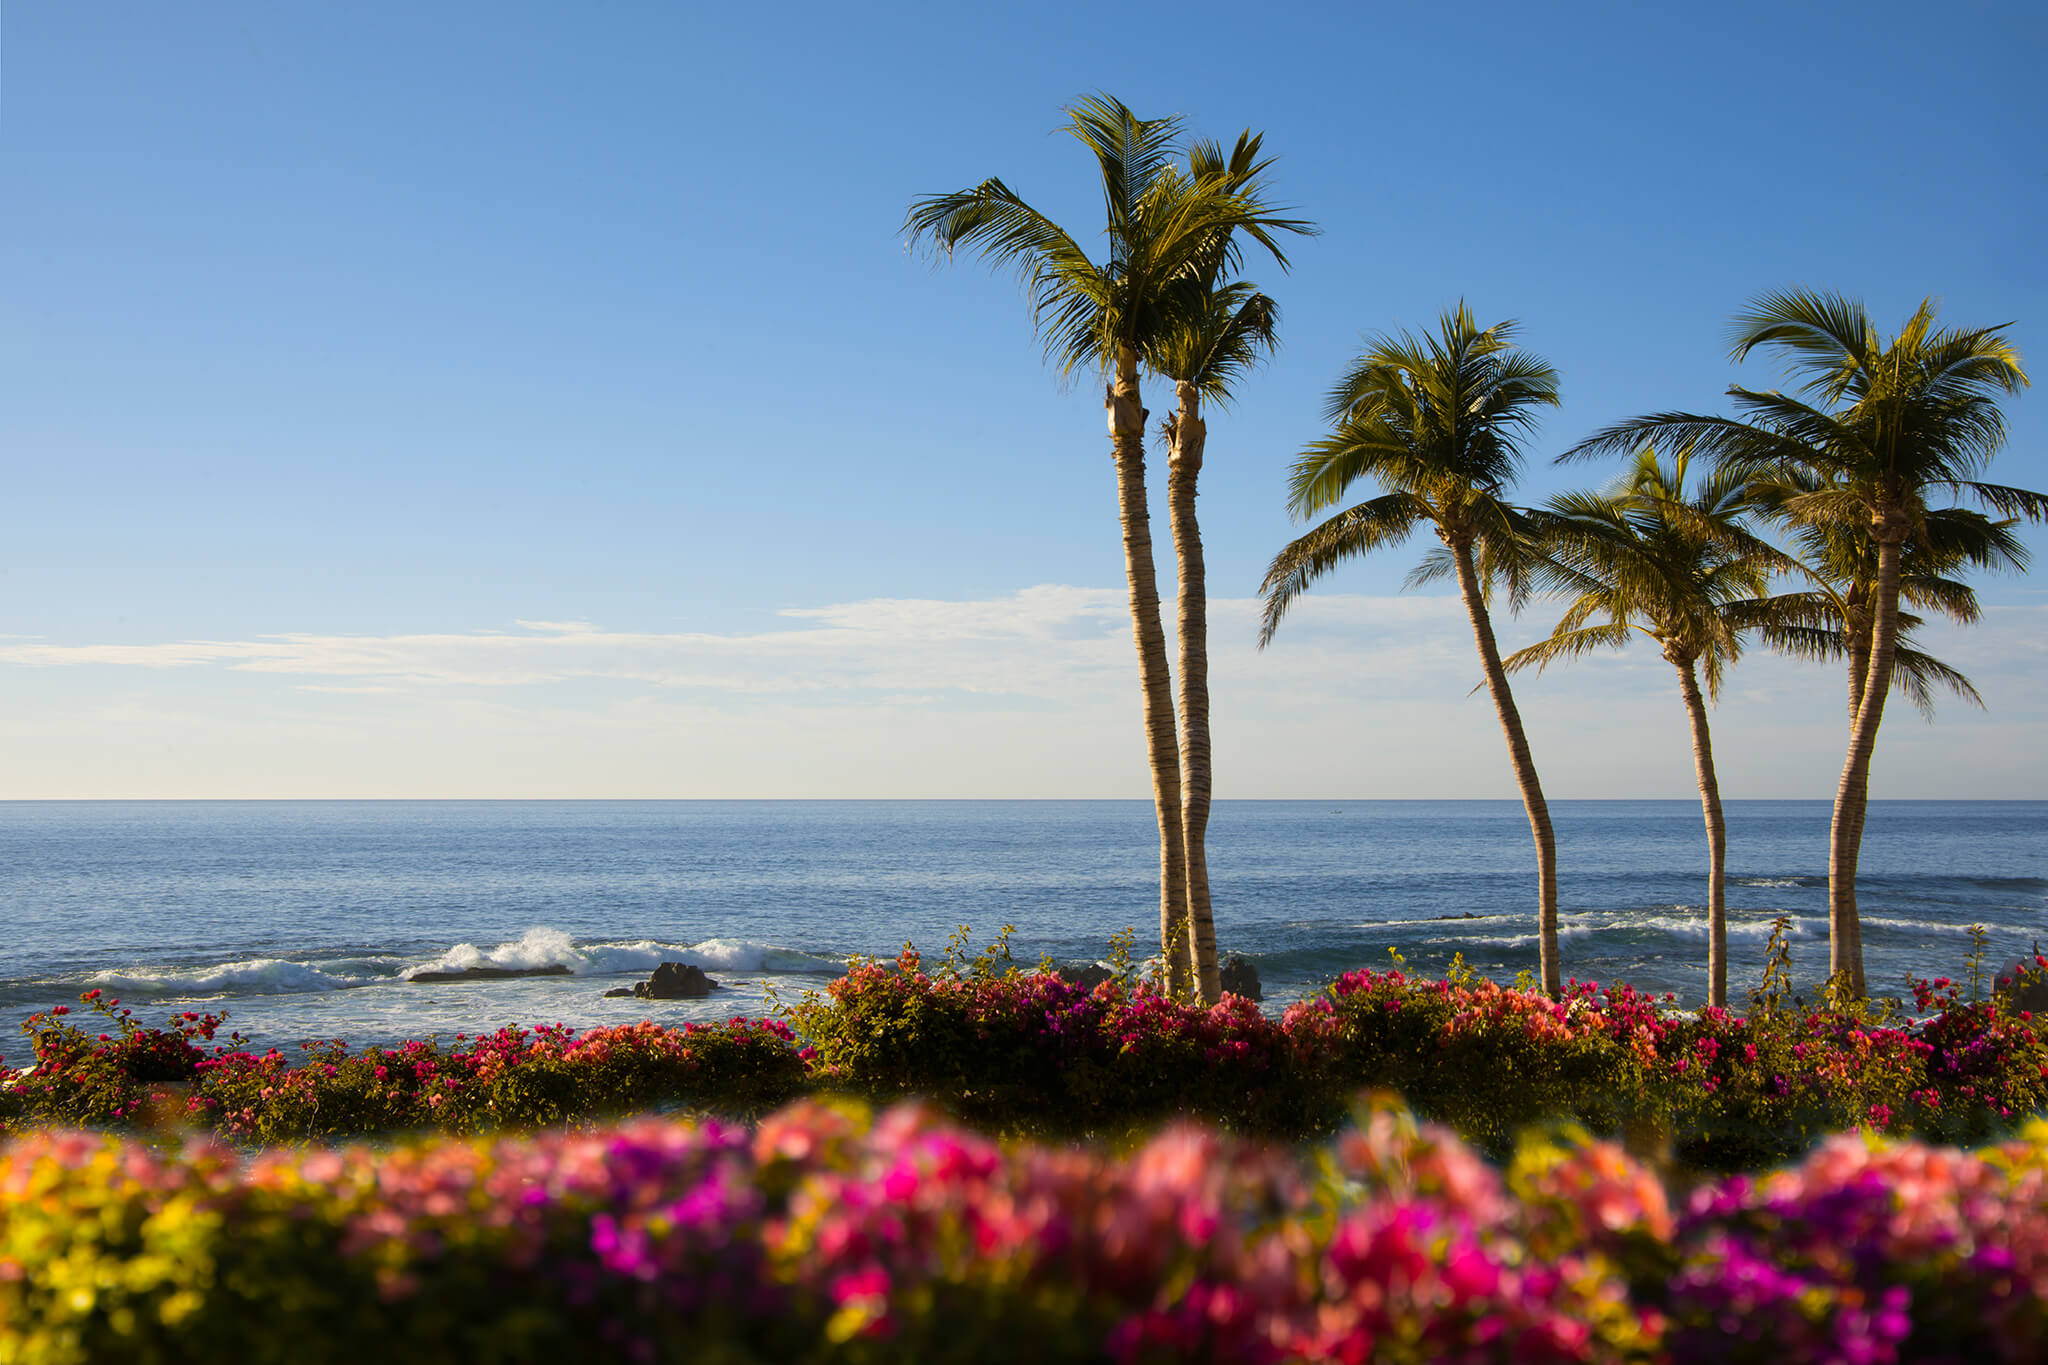 Palm Trees with colorful flowers